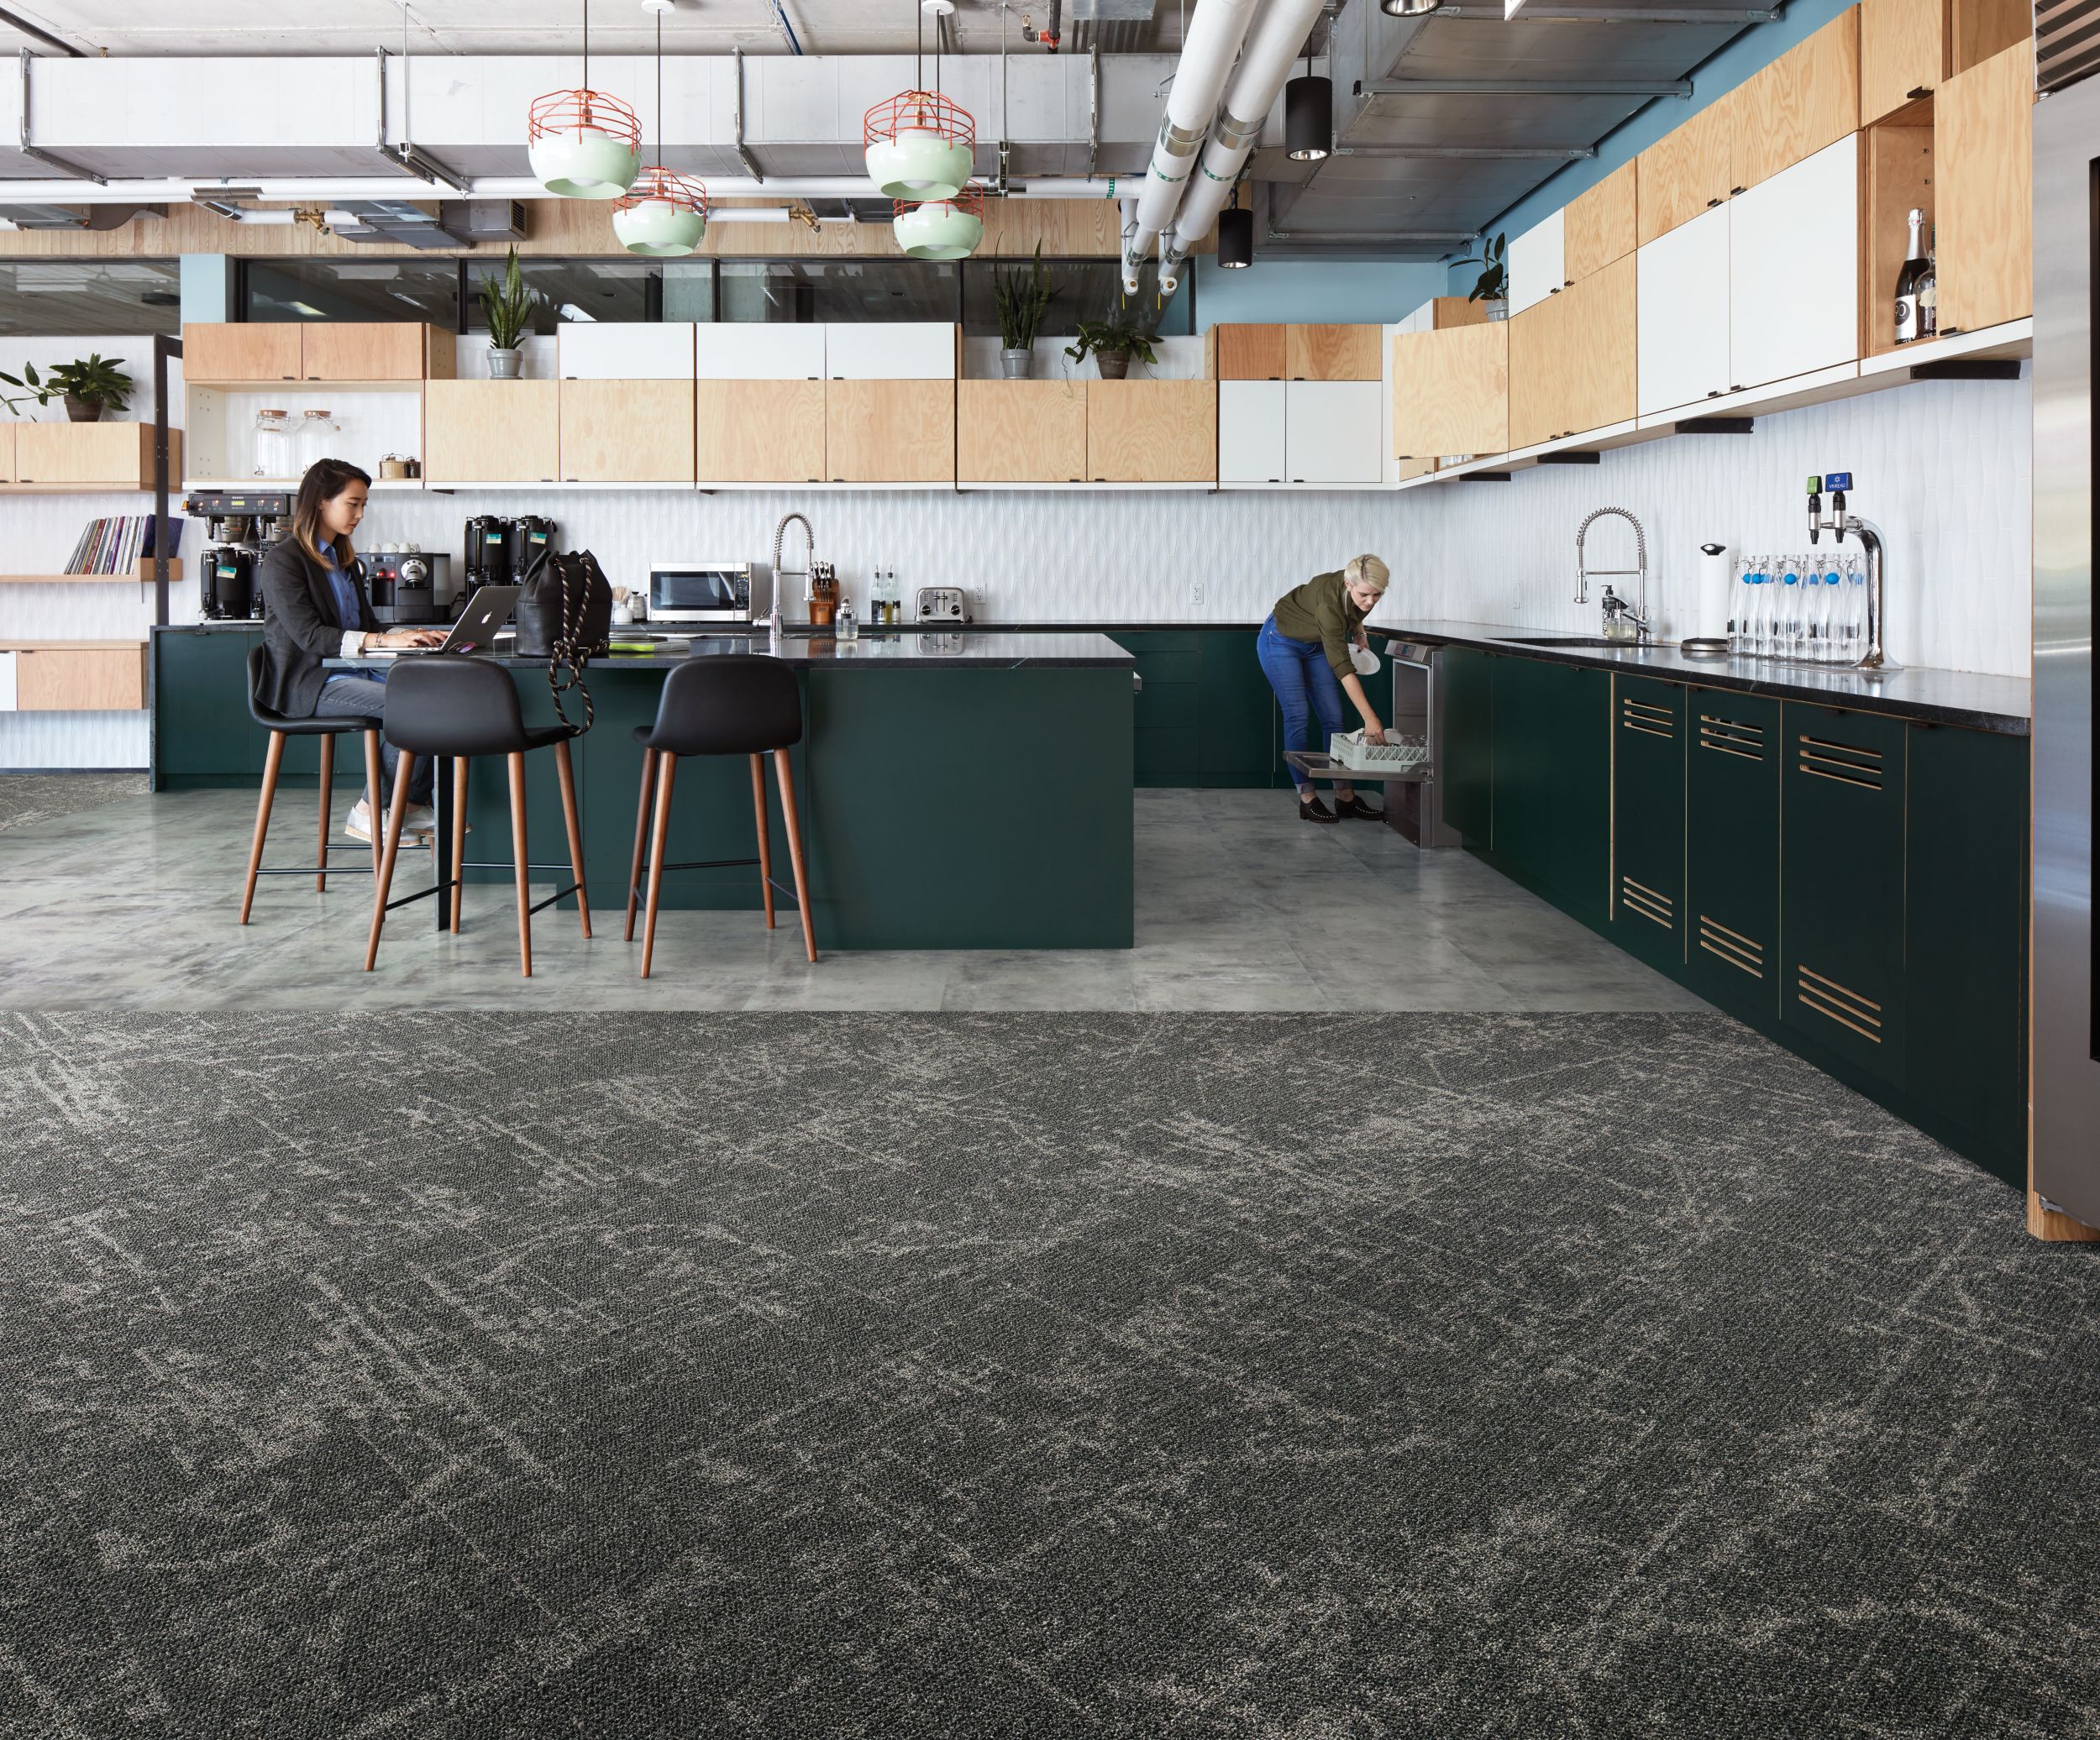 image Interface Ice Breaker carpet tile and Textured Stones LVT in kitchen area with women lodaing dish washer and women working on computer numéro 6